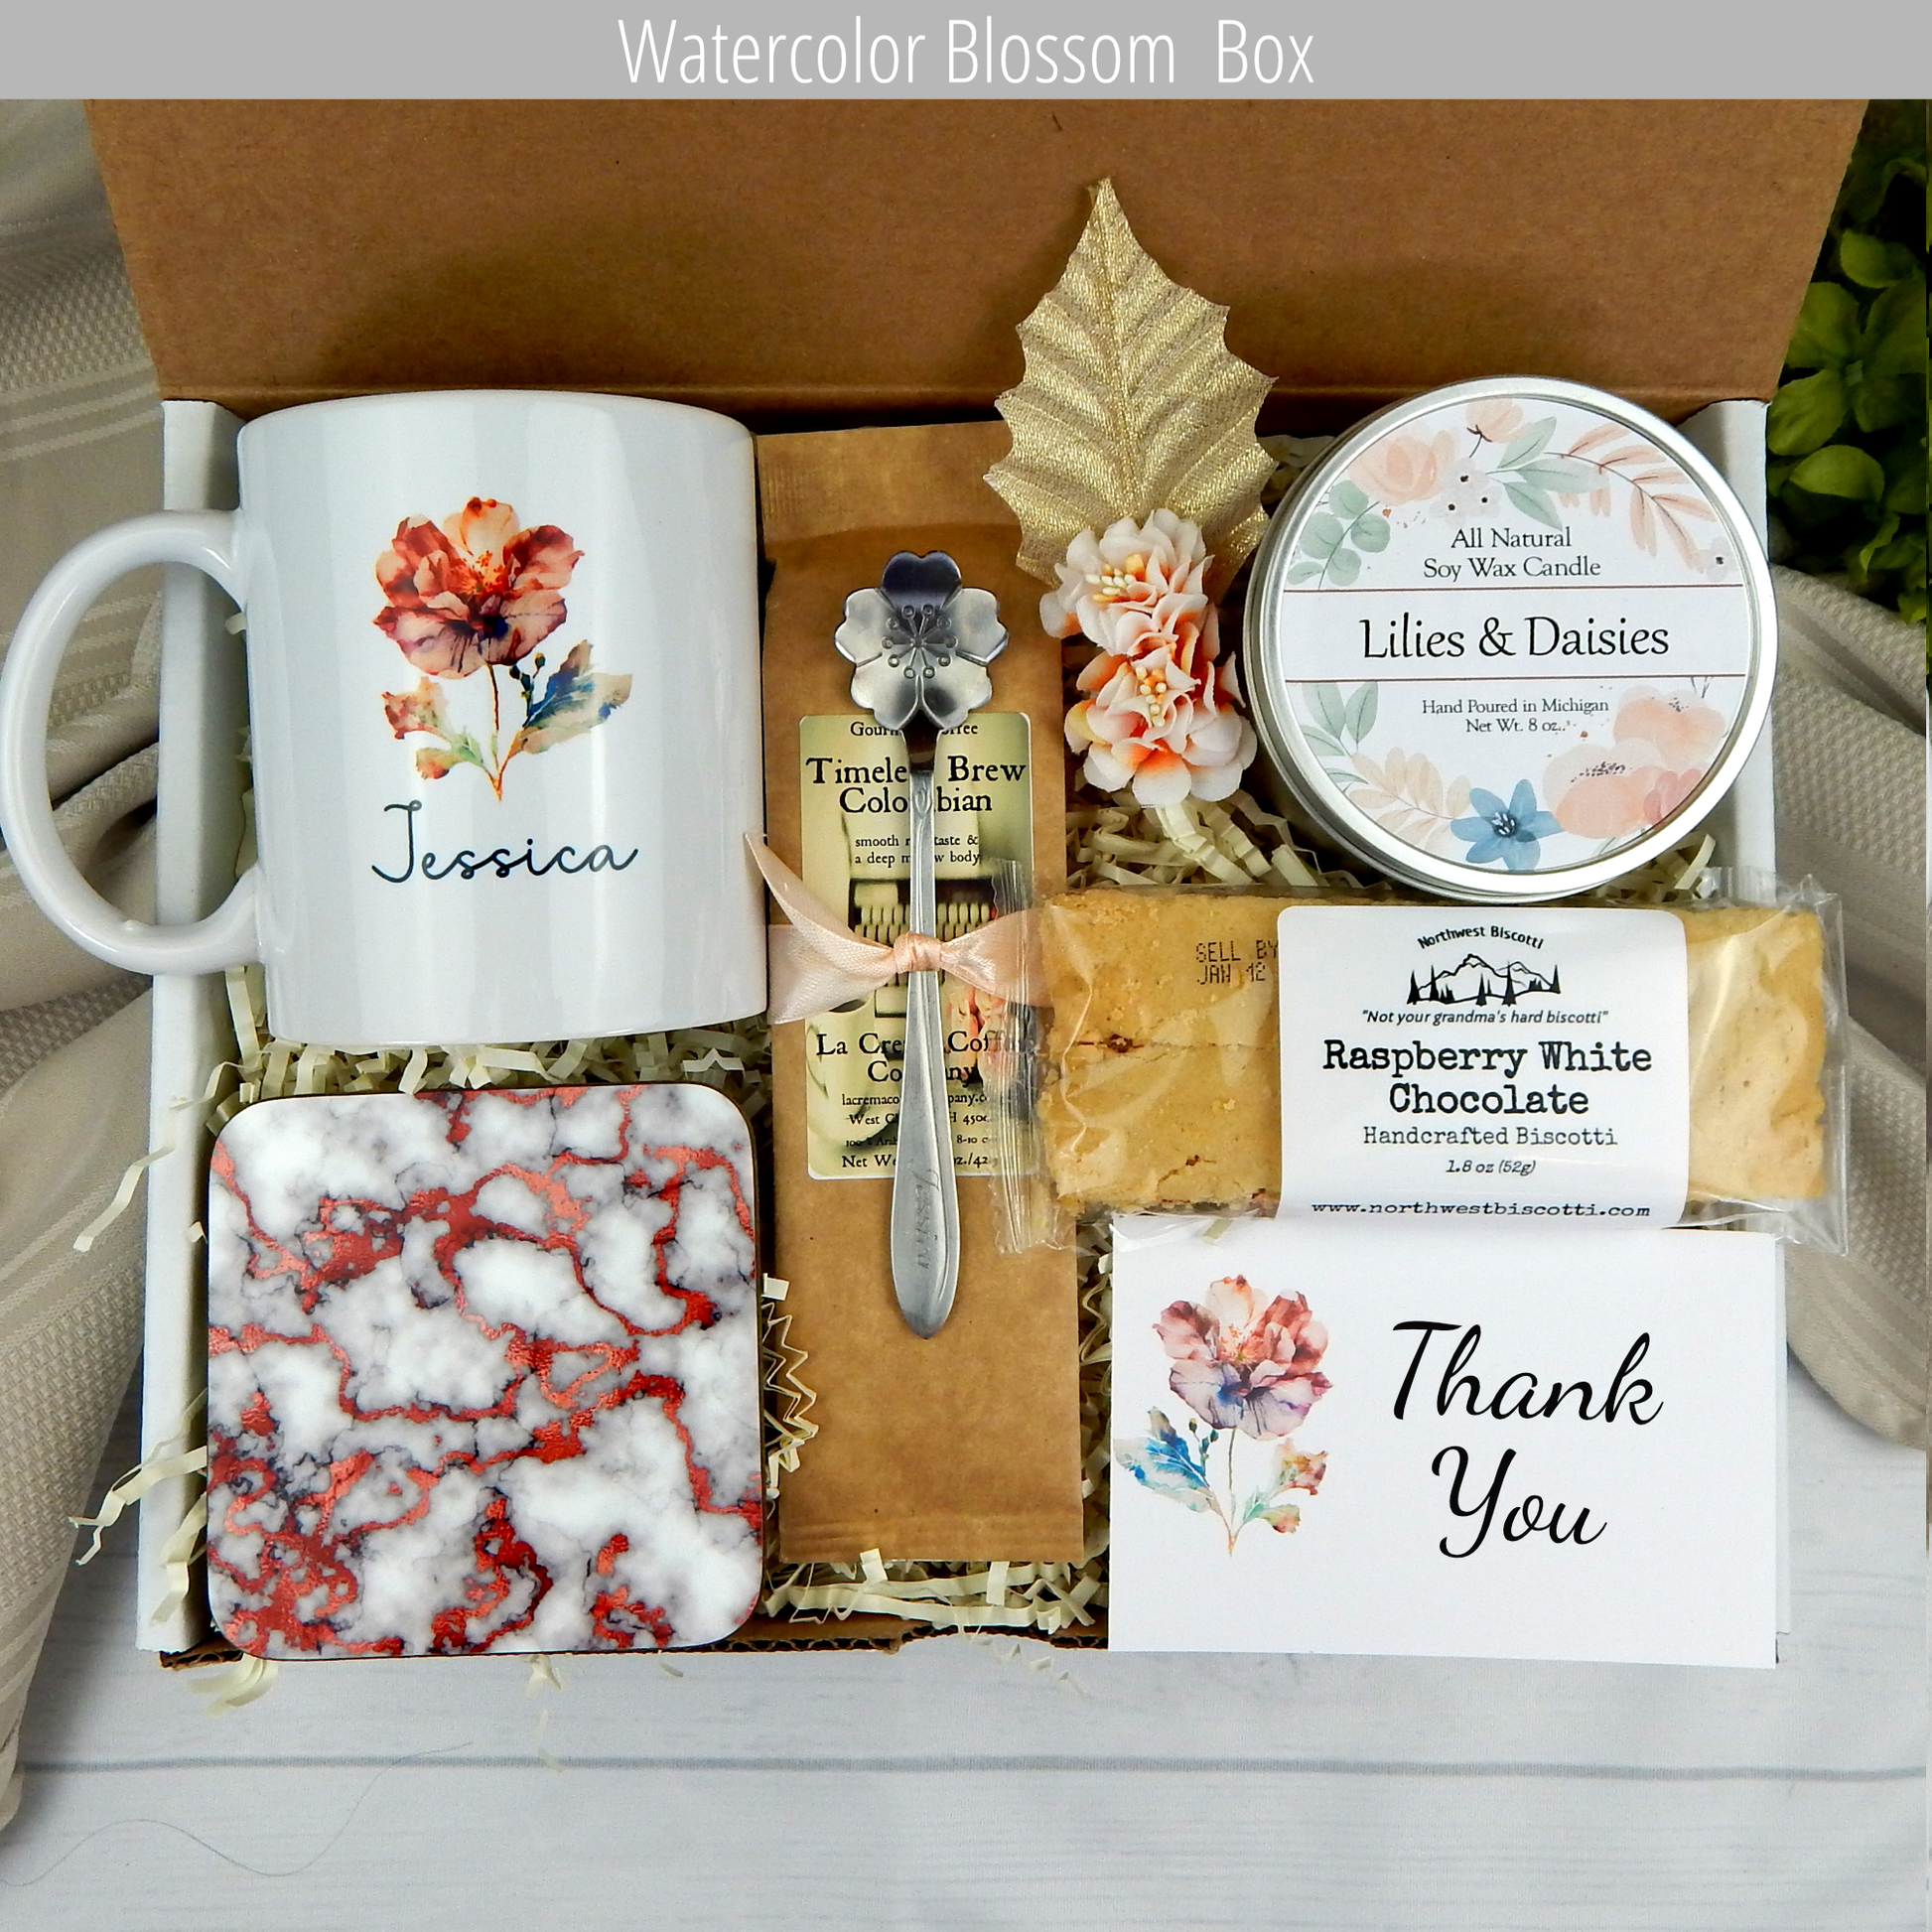 Thank you gift to send with coffee goodies and a personalized mug